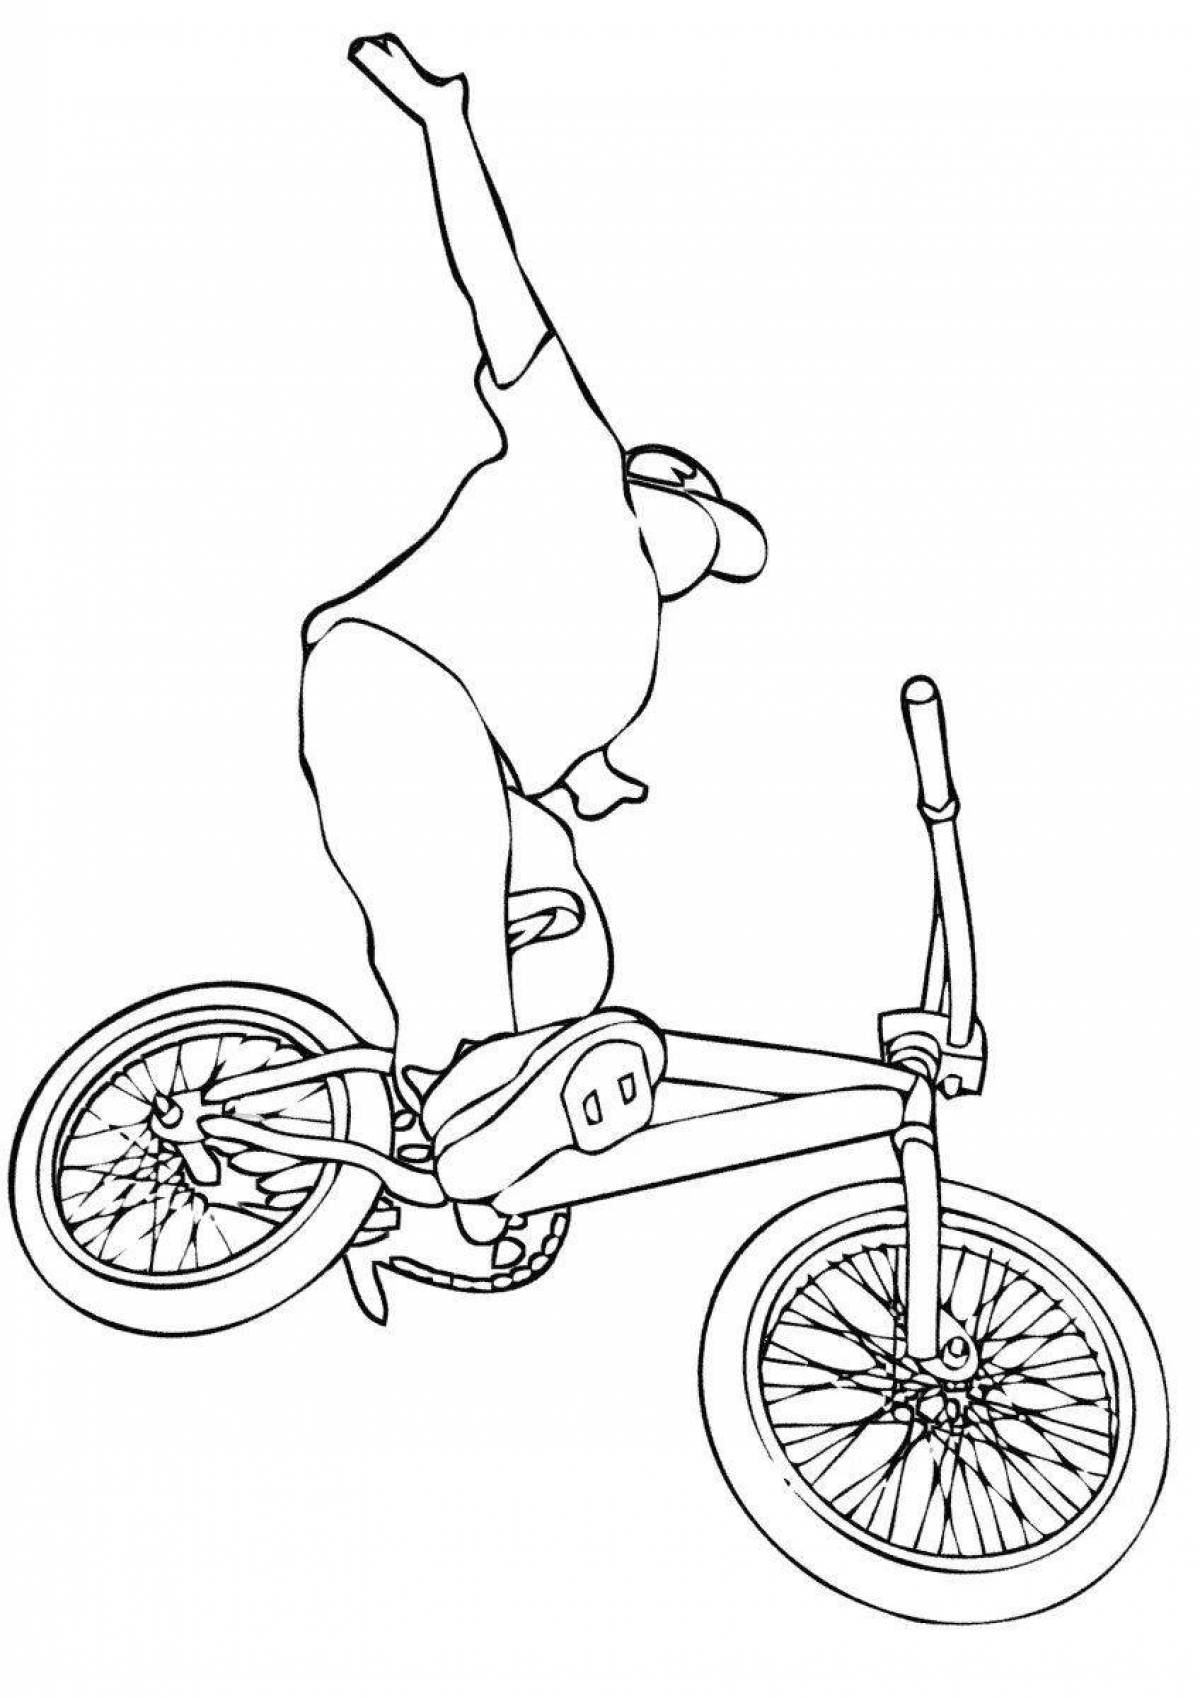 Dynamic stunt scooter coloring page